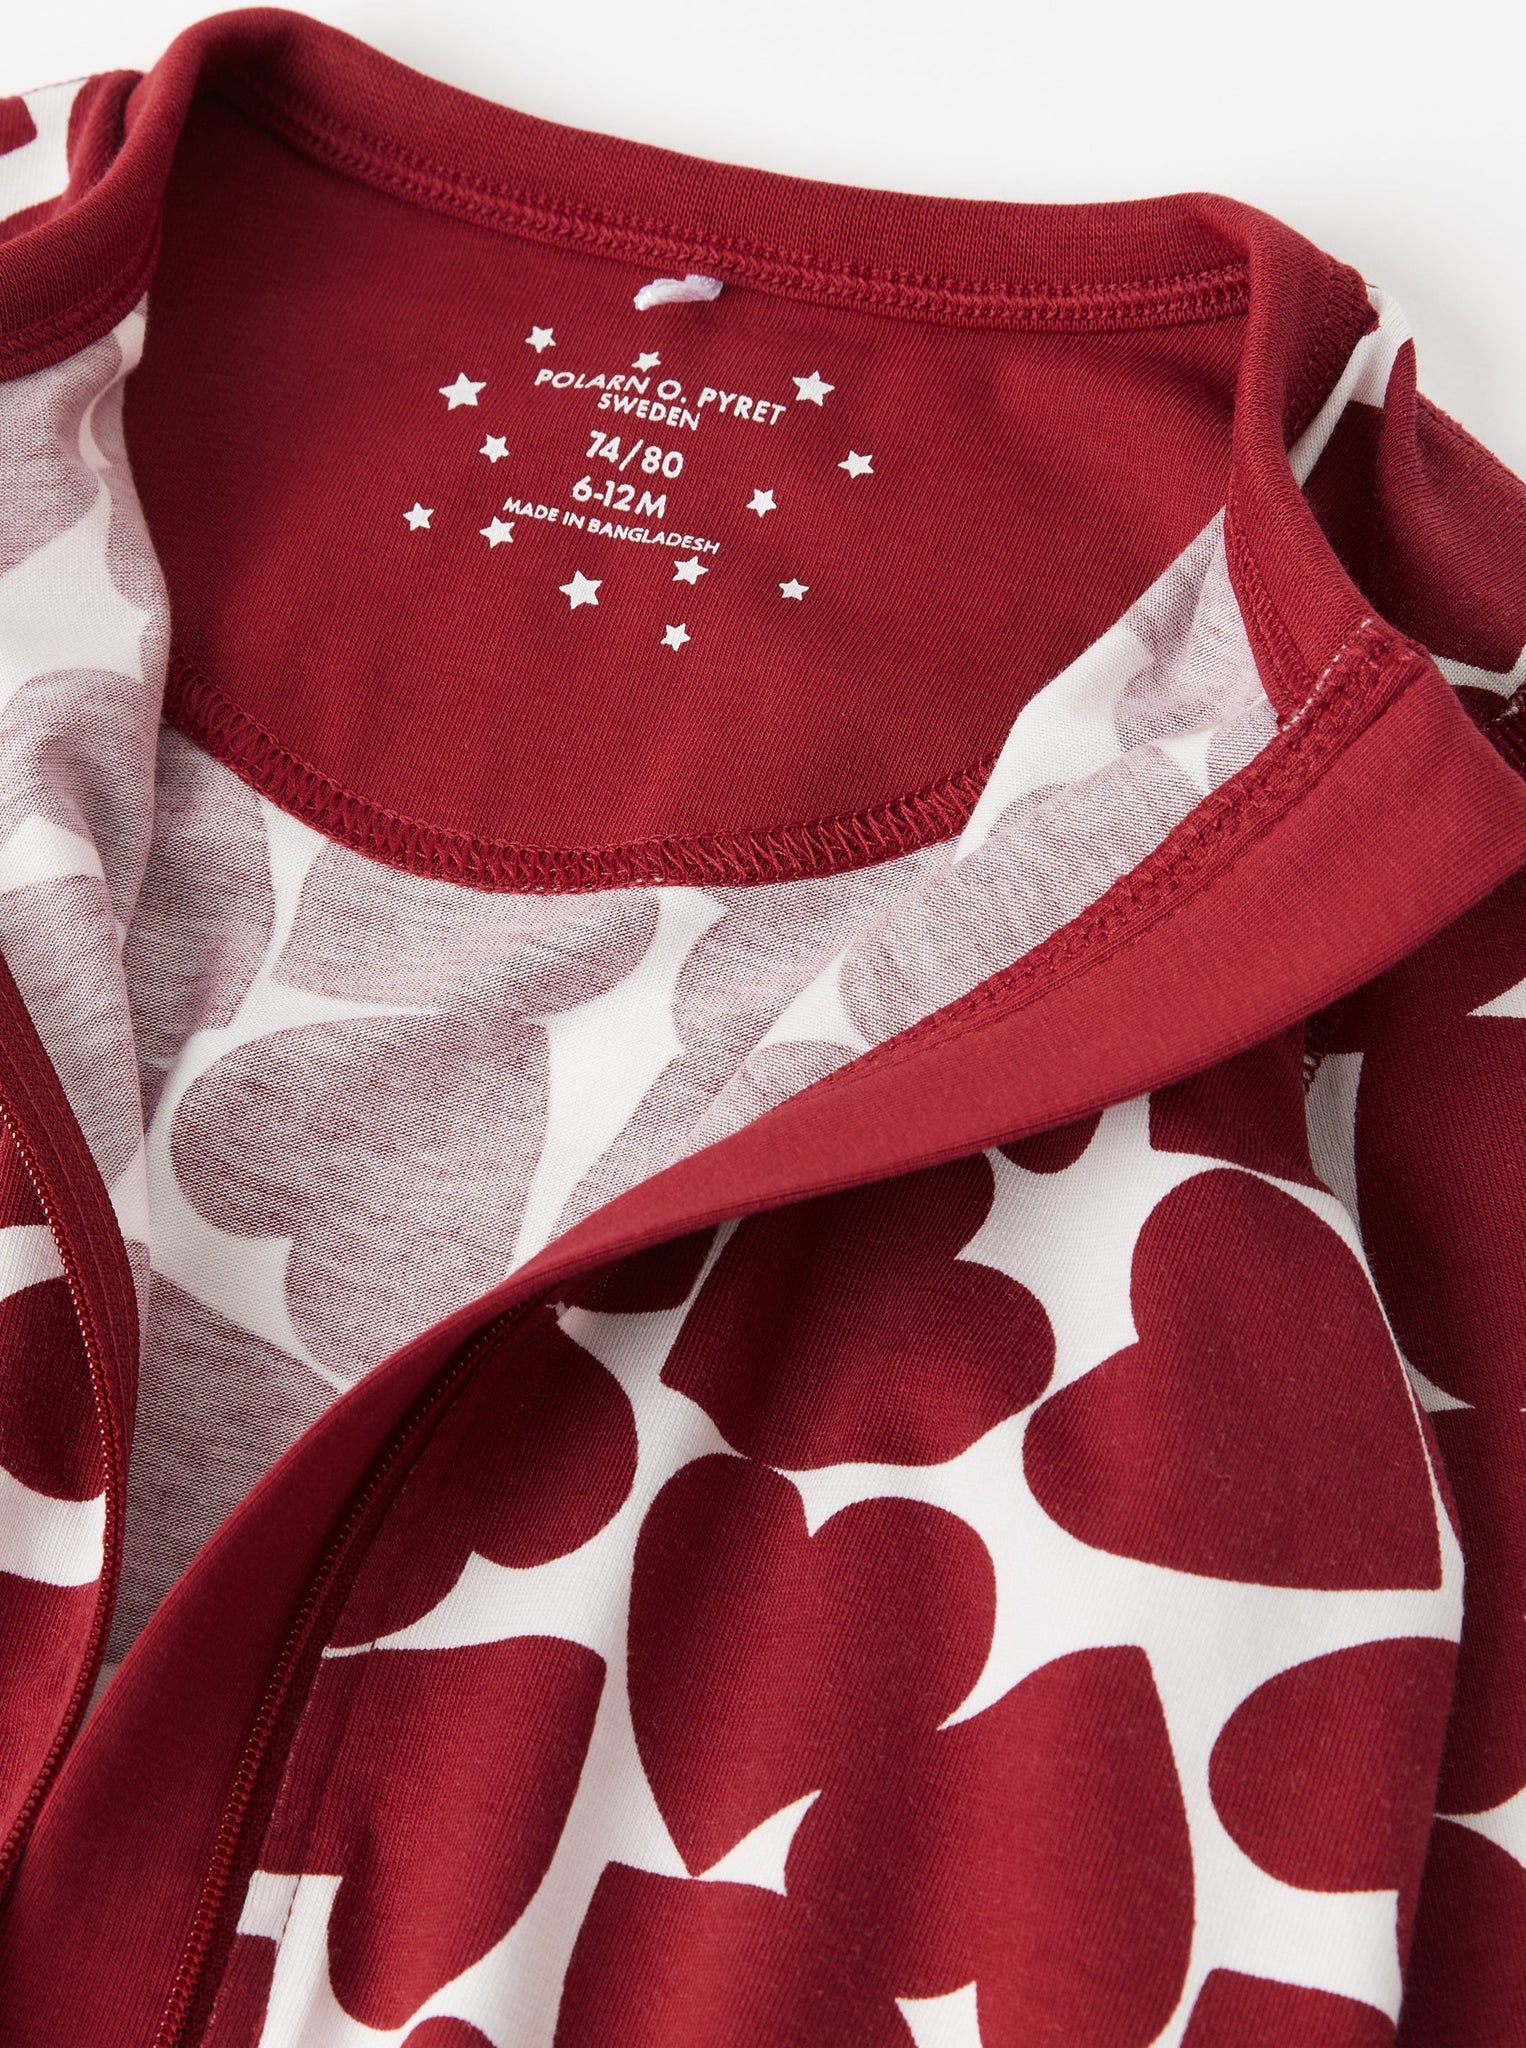 Heart Print Red Baby Sleepsuit from the Polarn O. Pyret baby collection. The best ethical baby clothes